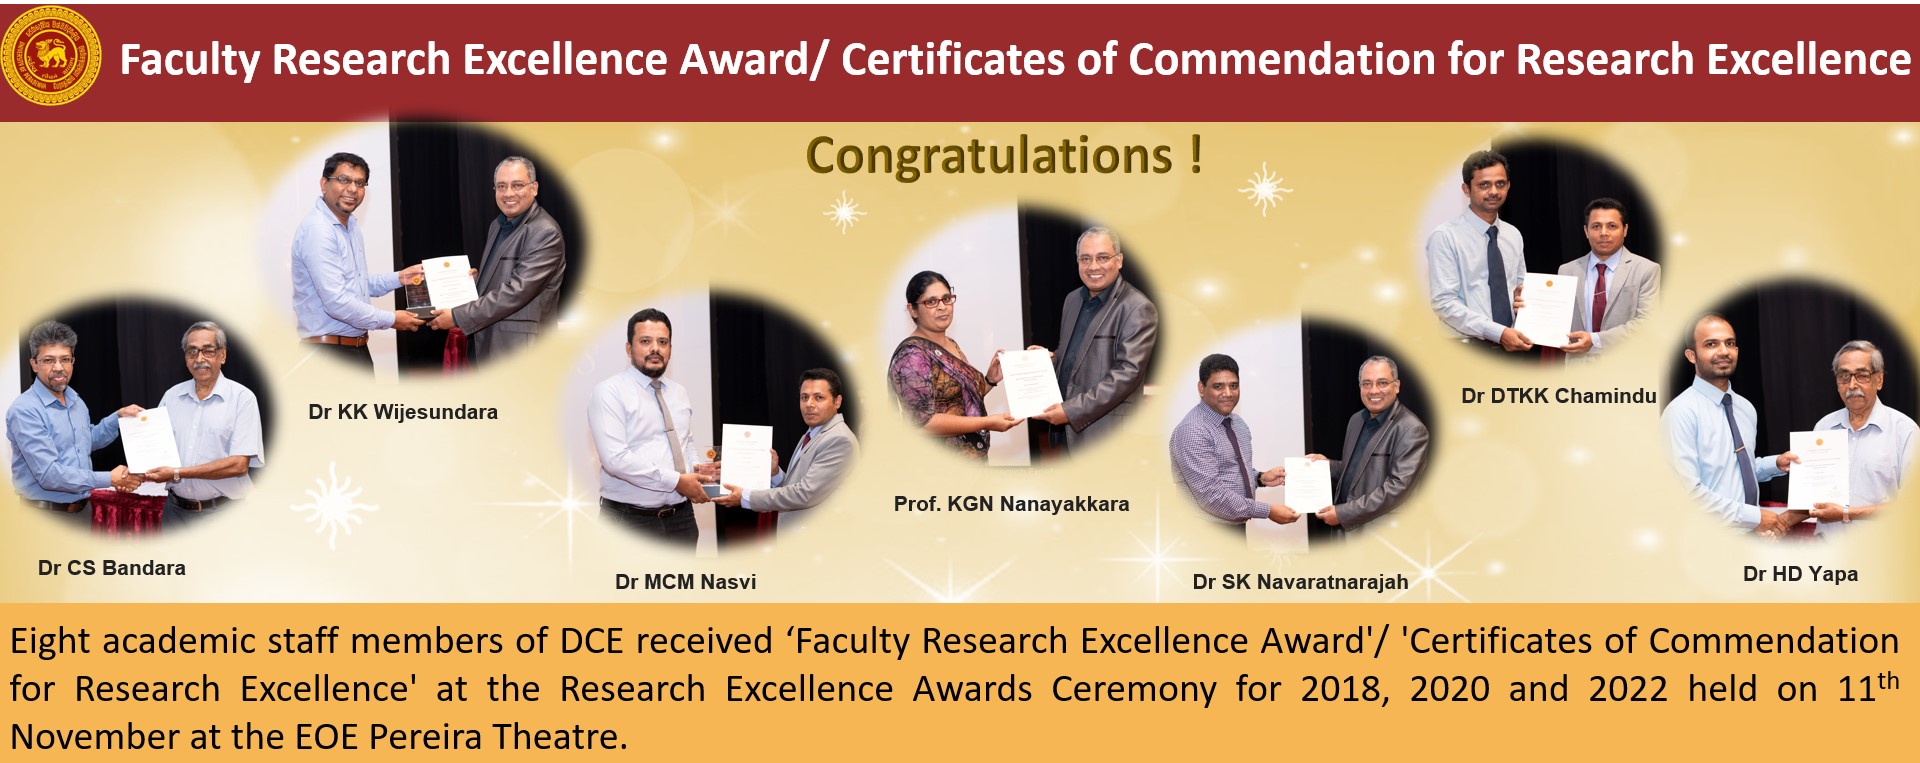 Faculty Research Excellence Award/ Certificates of Commendation for Research Excellence